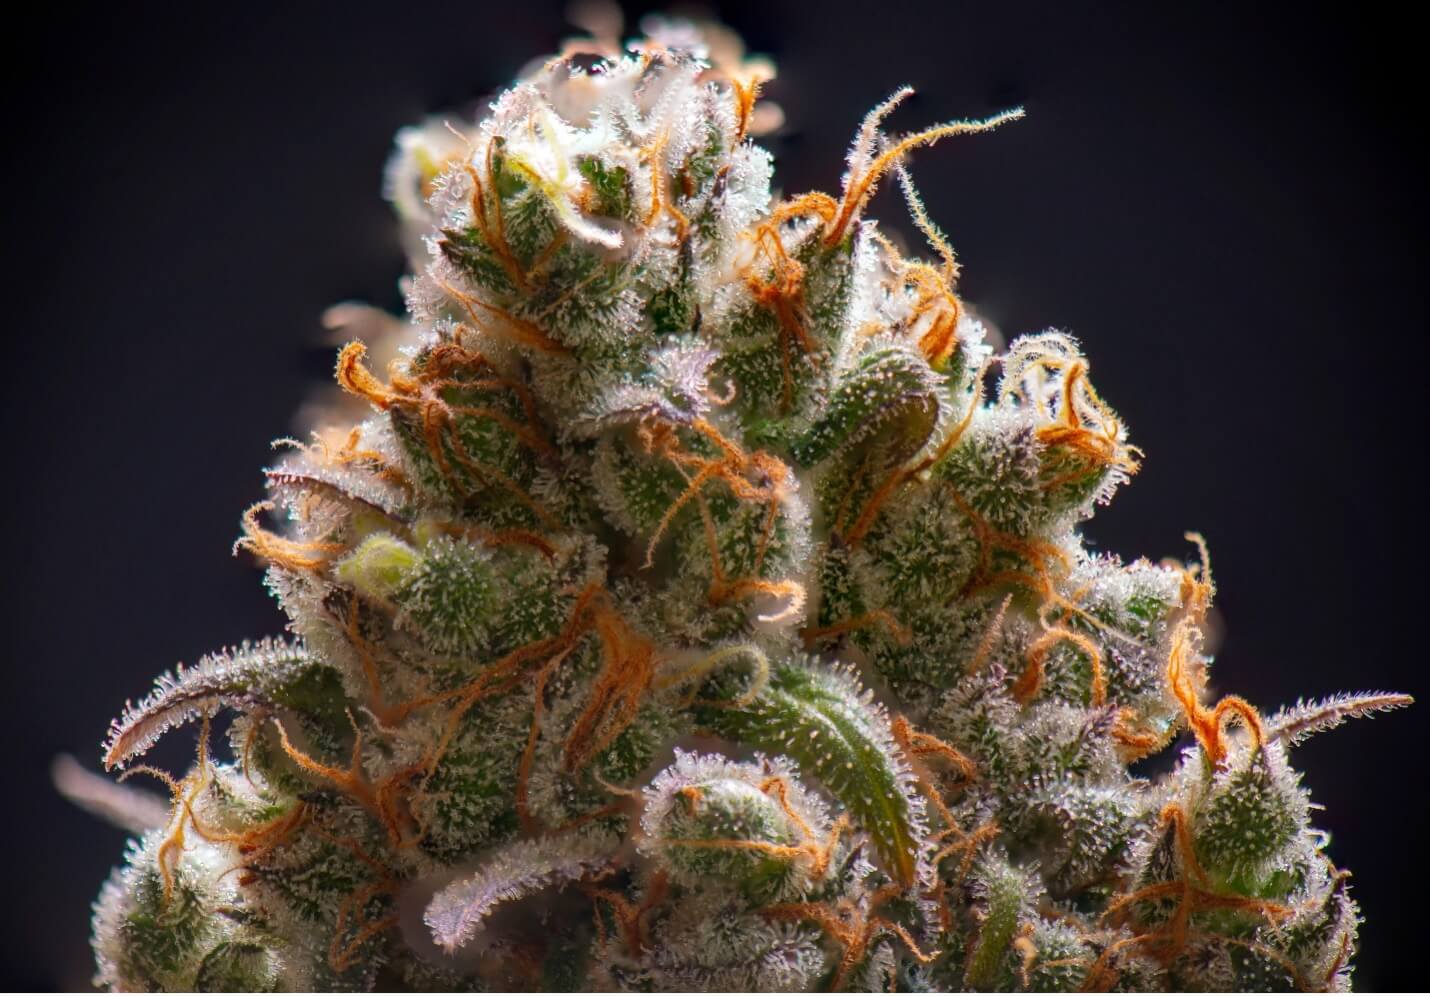 How Are New Cannabis Strains Created?